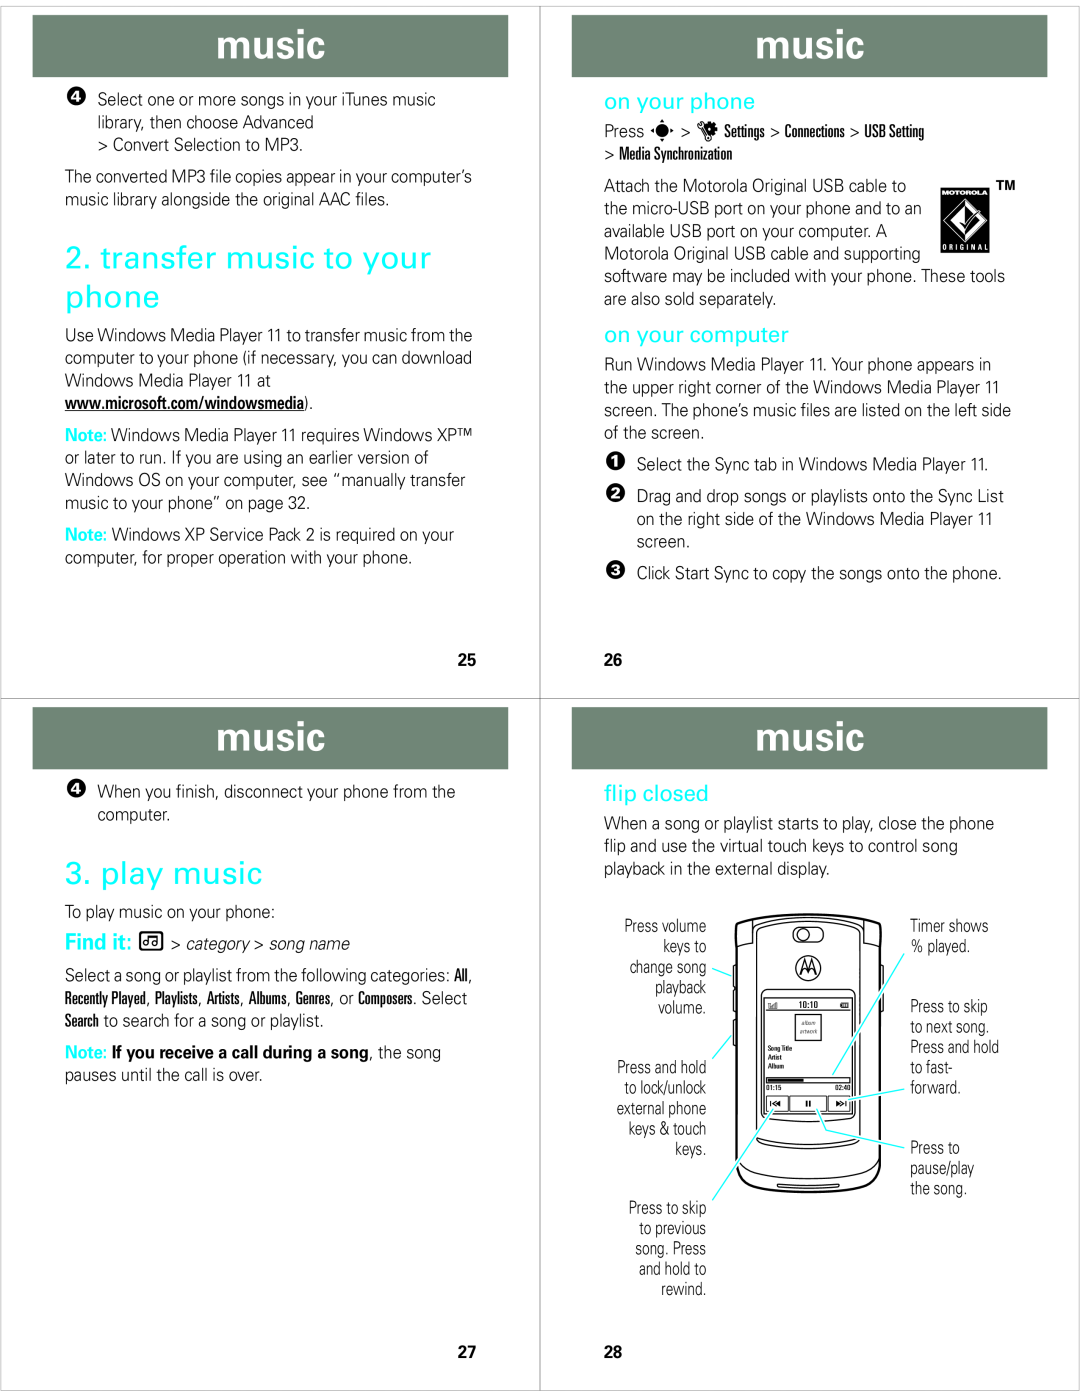 Motorola V8 manual music, on your phone, on your computer, flip closed, Find it category song name 